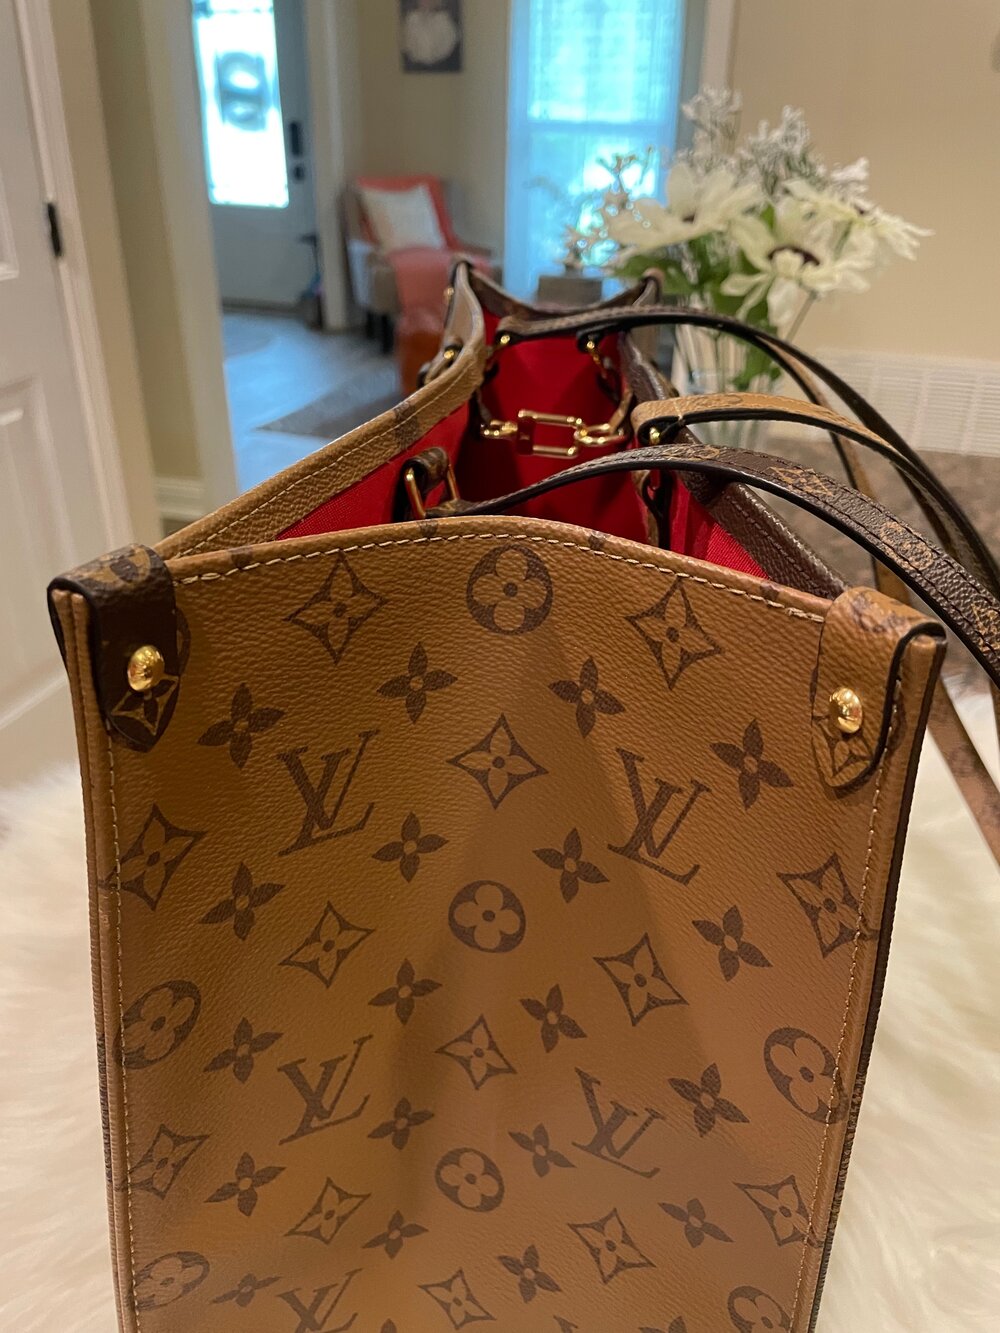 Louis Vuitton On The Go GM Monogram Giant Brown Tote Bag – I MISS YOU  VINTAGE